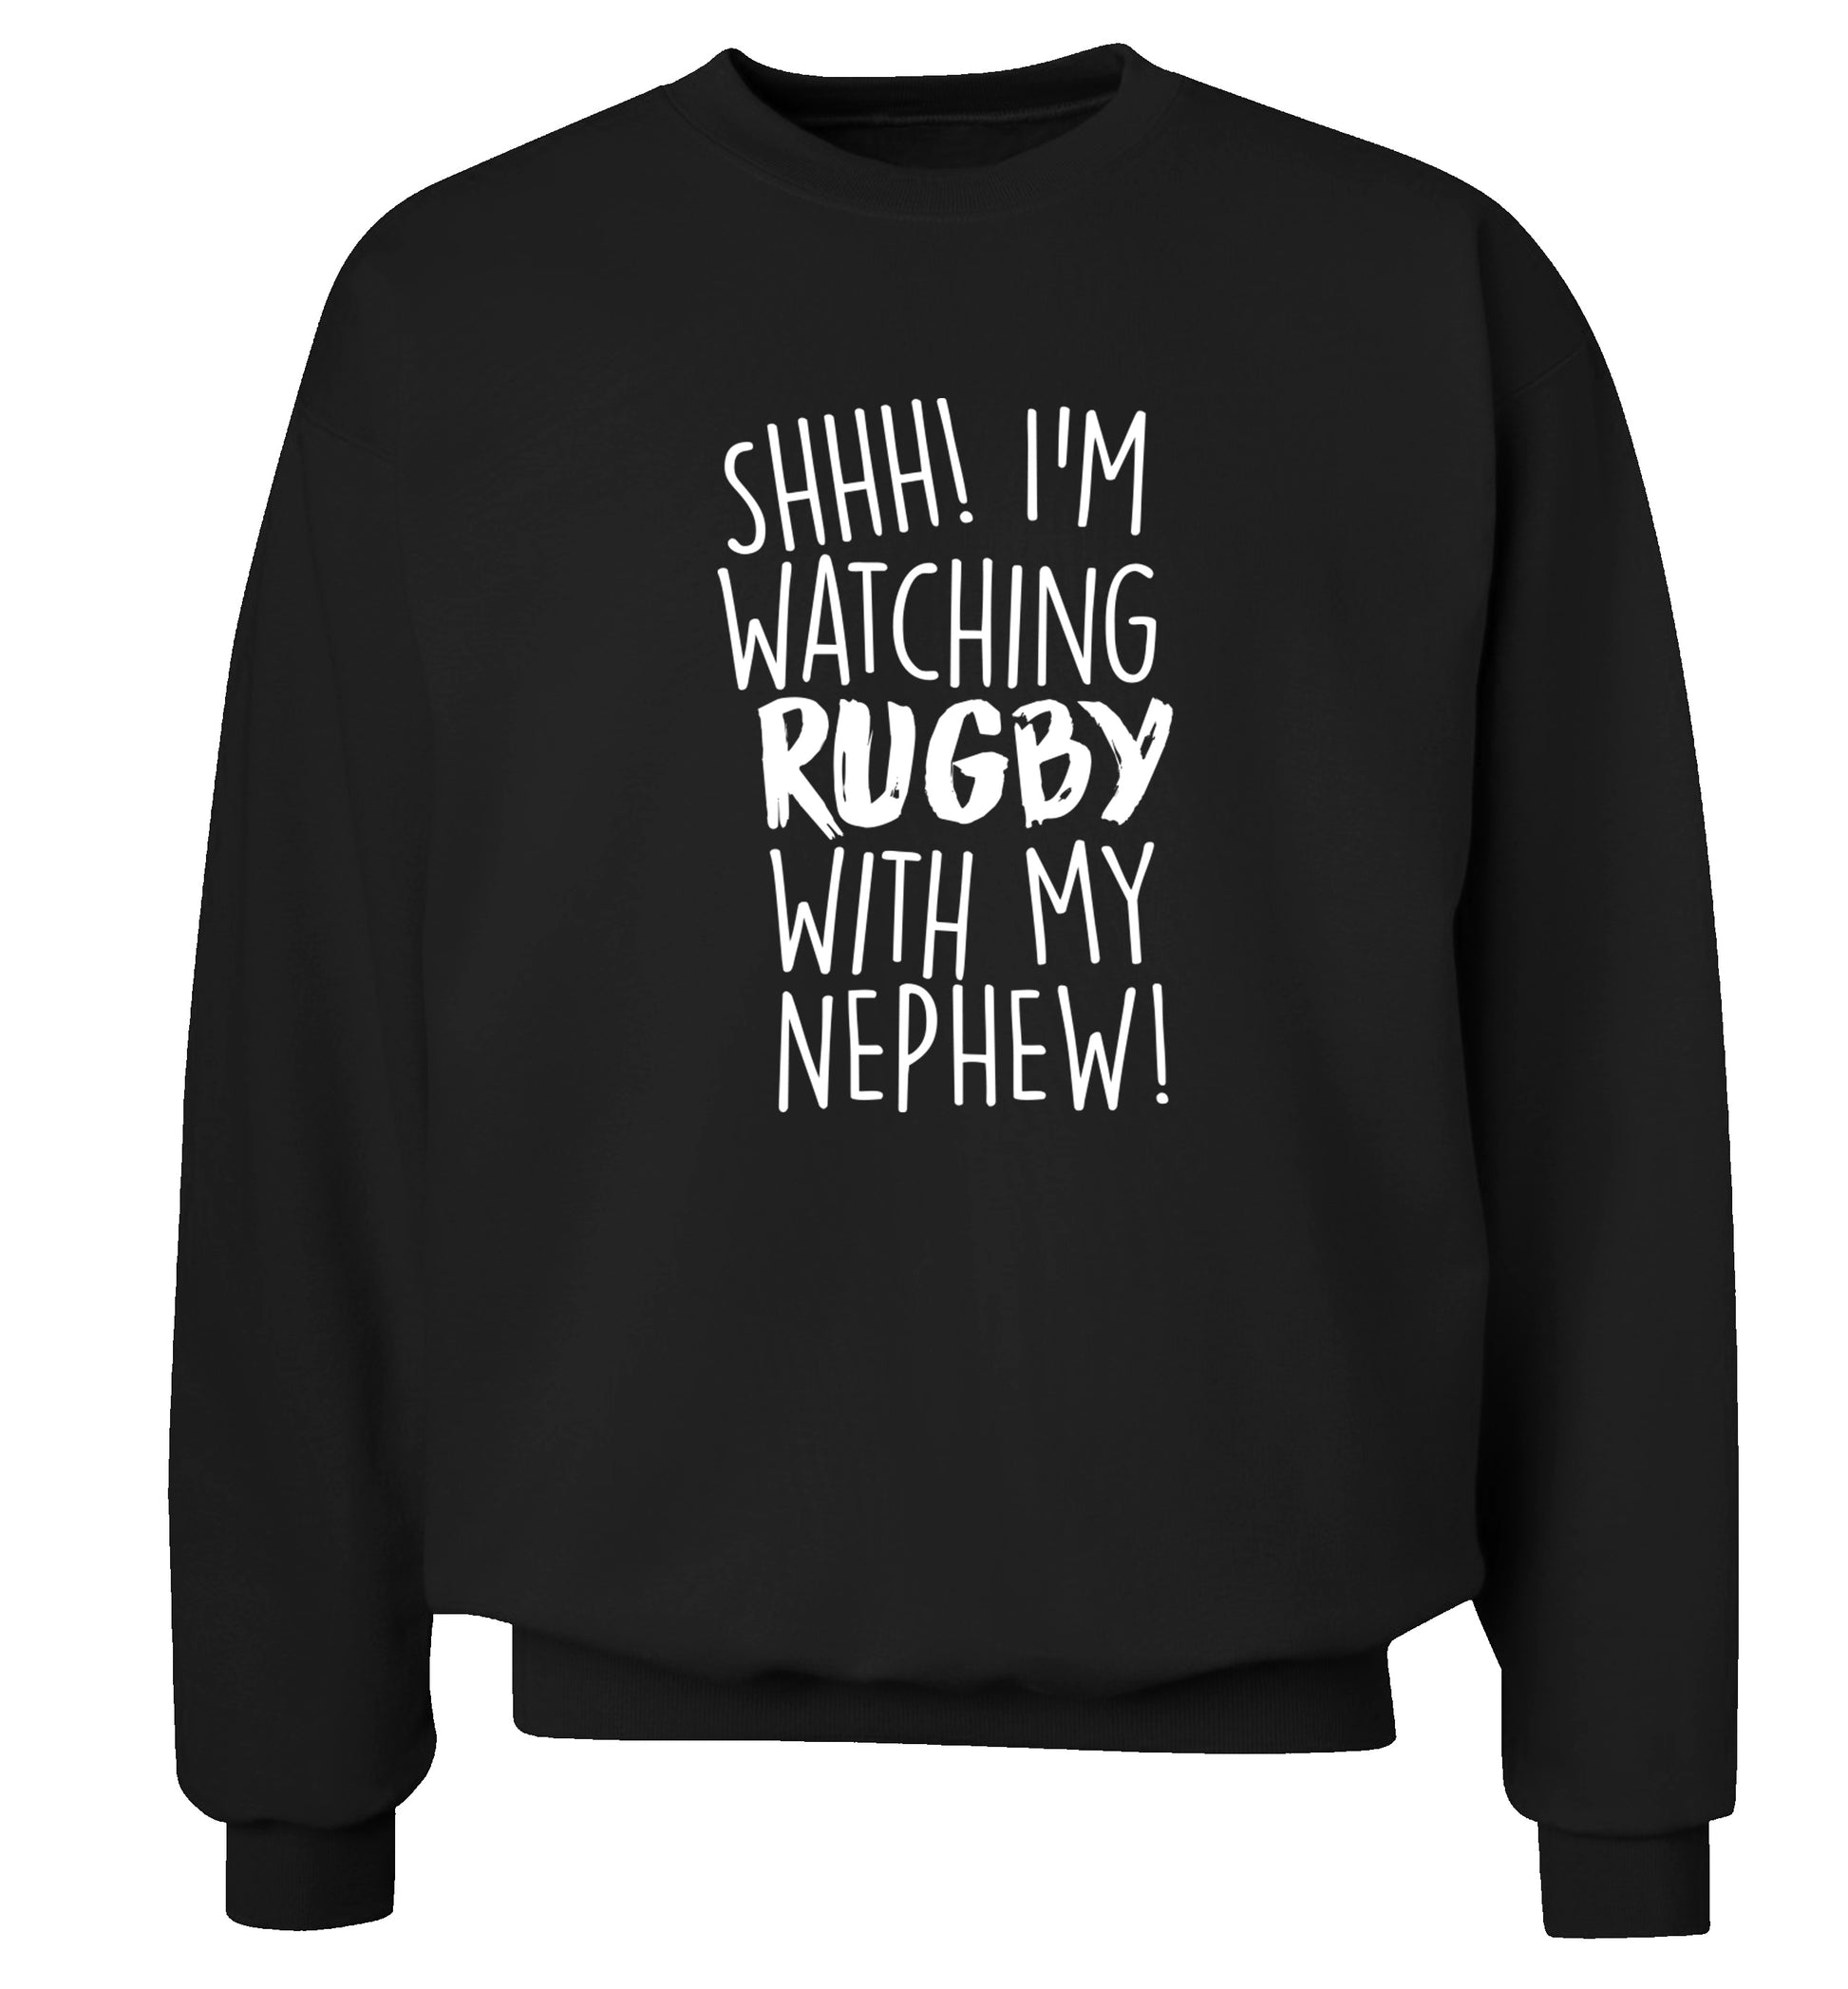 Shh.. I'm watching rugby with my nephew Adult's unisex black Sweater 2XL